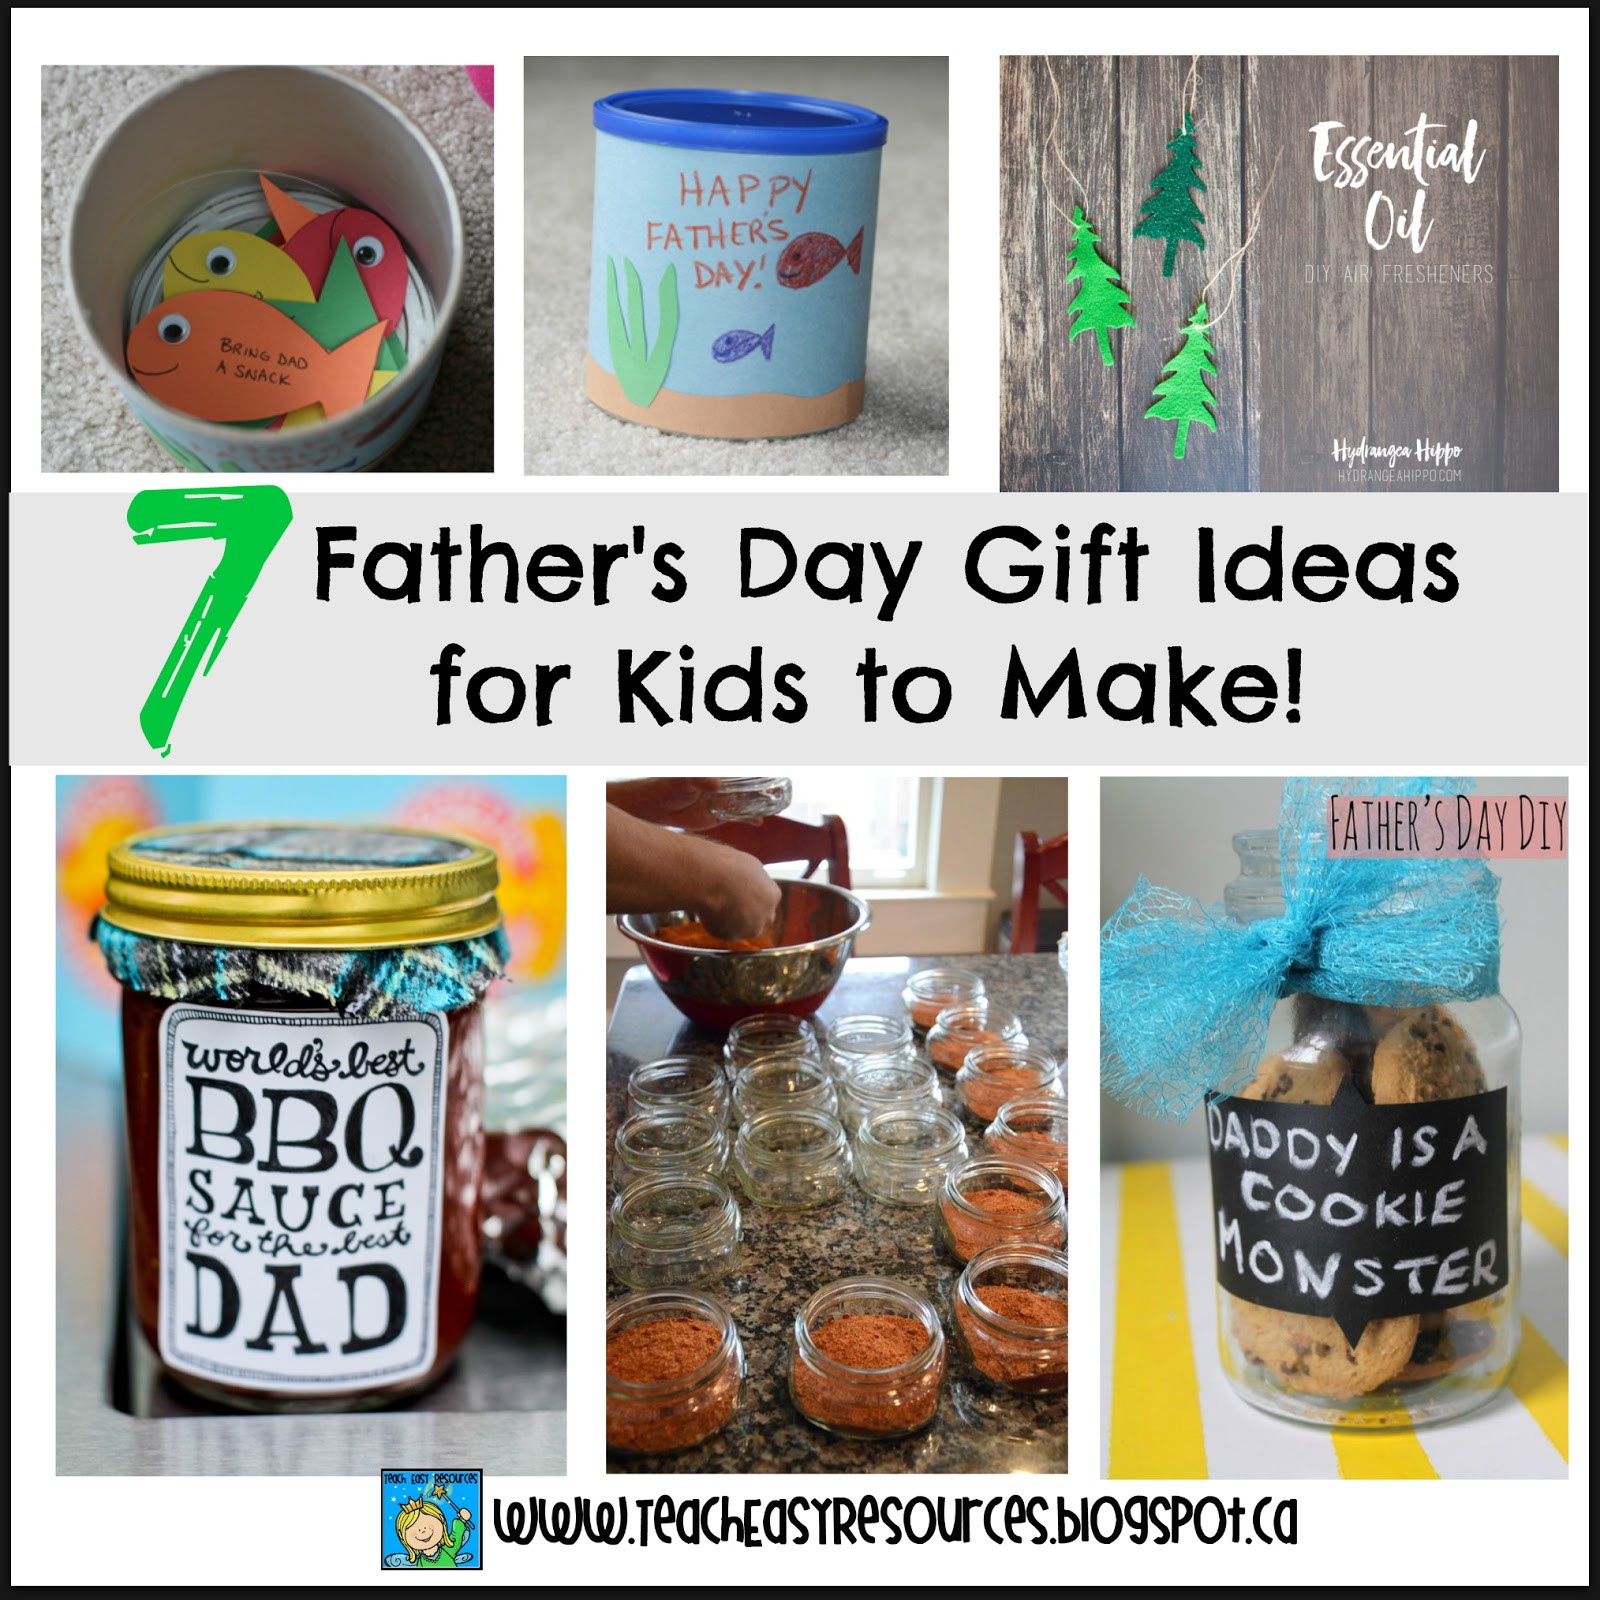 Fathers Day Photo Ideas
 Teach Easy Resources Father s Day Gift Ideas that Kids